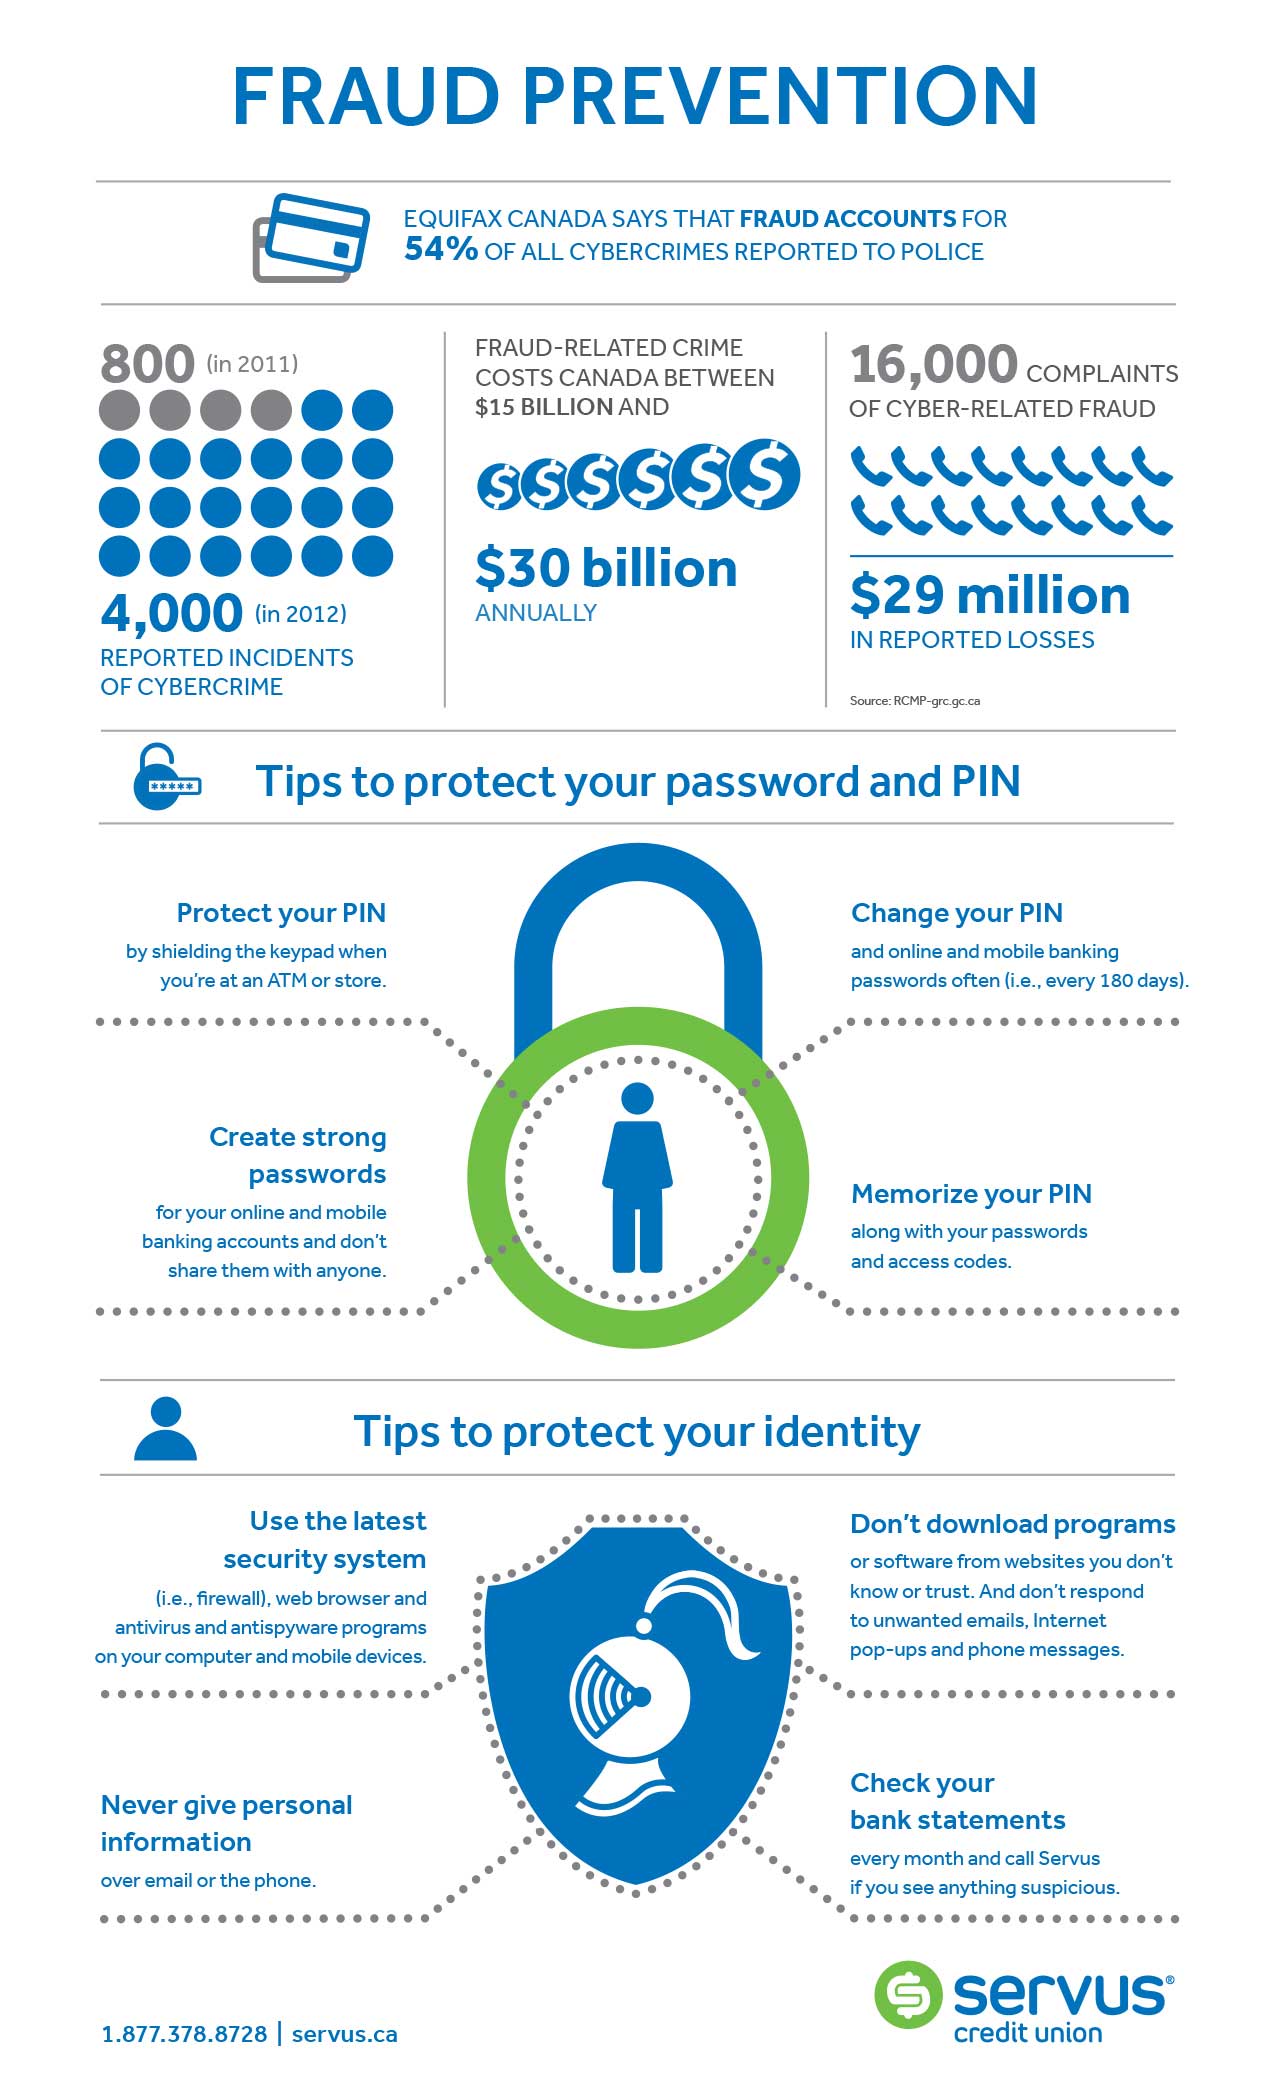 fraud prevention infographic